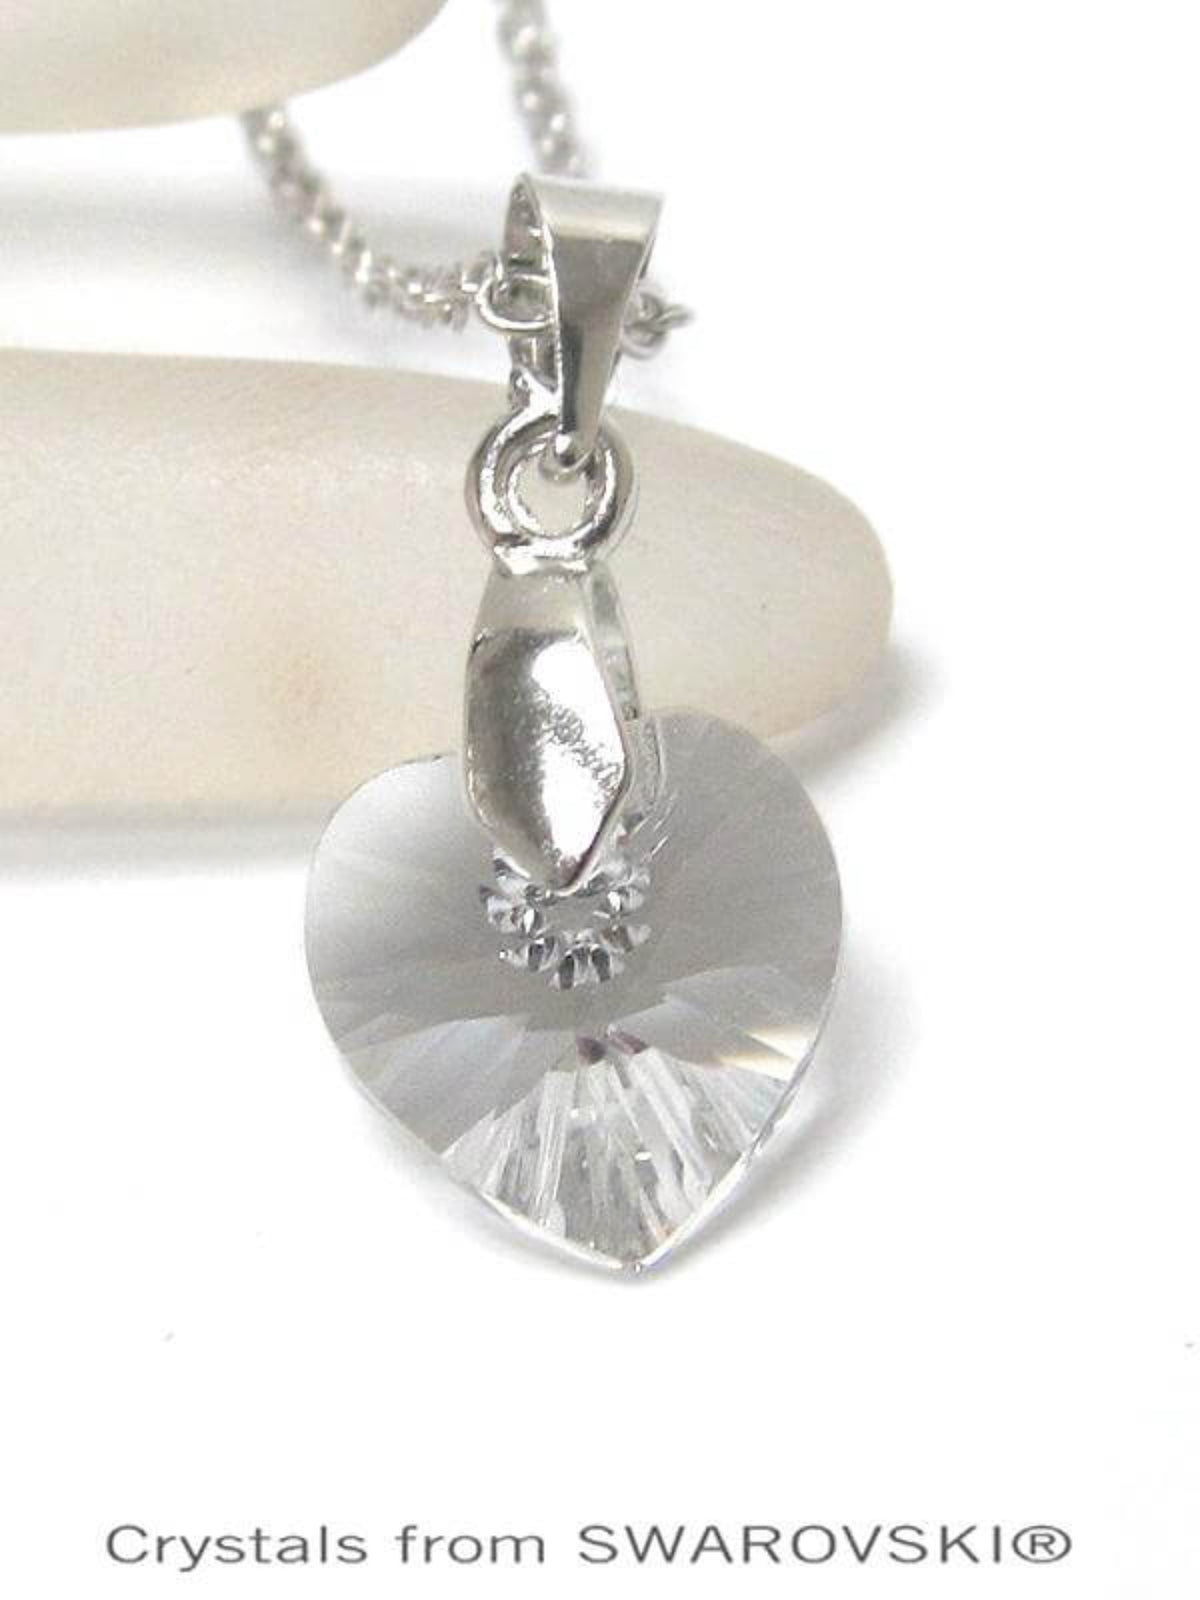 Genuine Swarovski Clear Crystal Semplice Heart Pendant Necklace - The House of Awareness